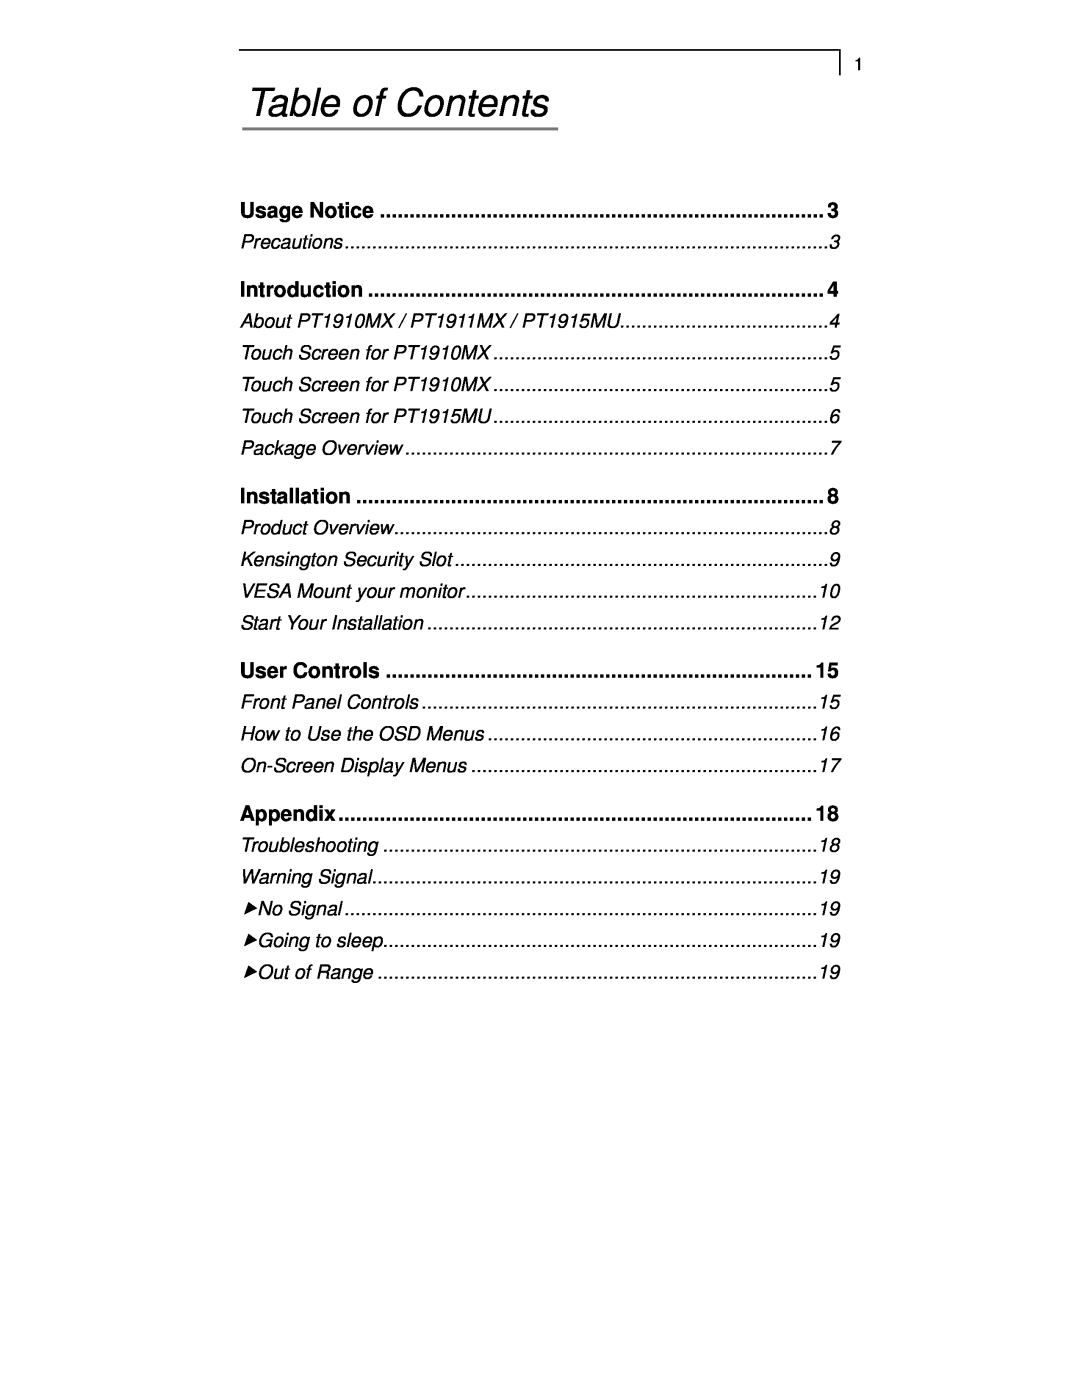 Planar PT1911MX manual Table of Contents, Usage Notice, Introduction, Installation, User Controls, Appendix 